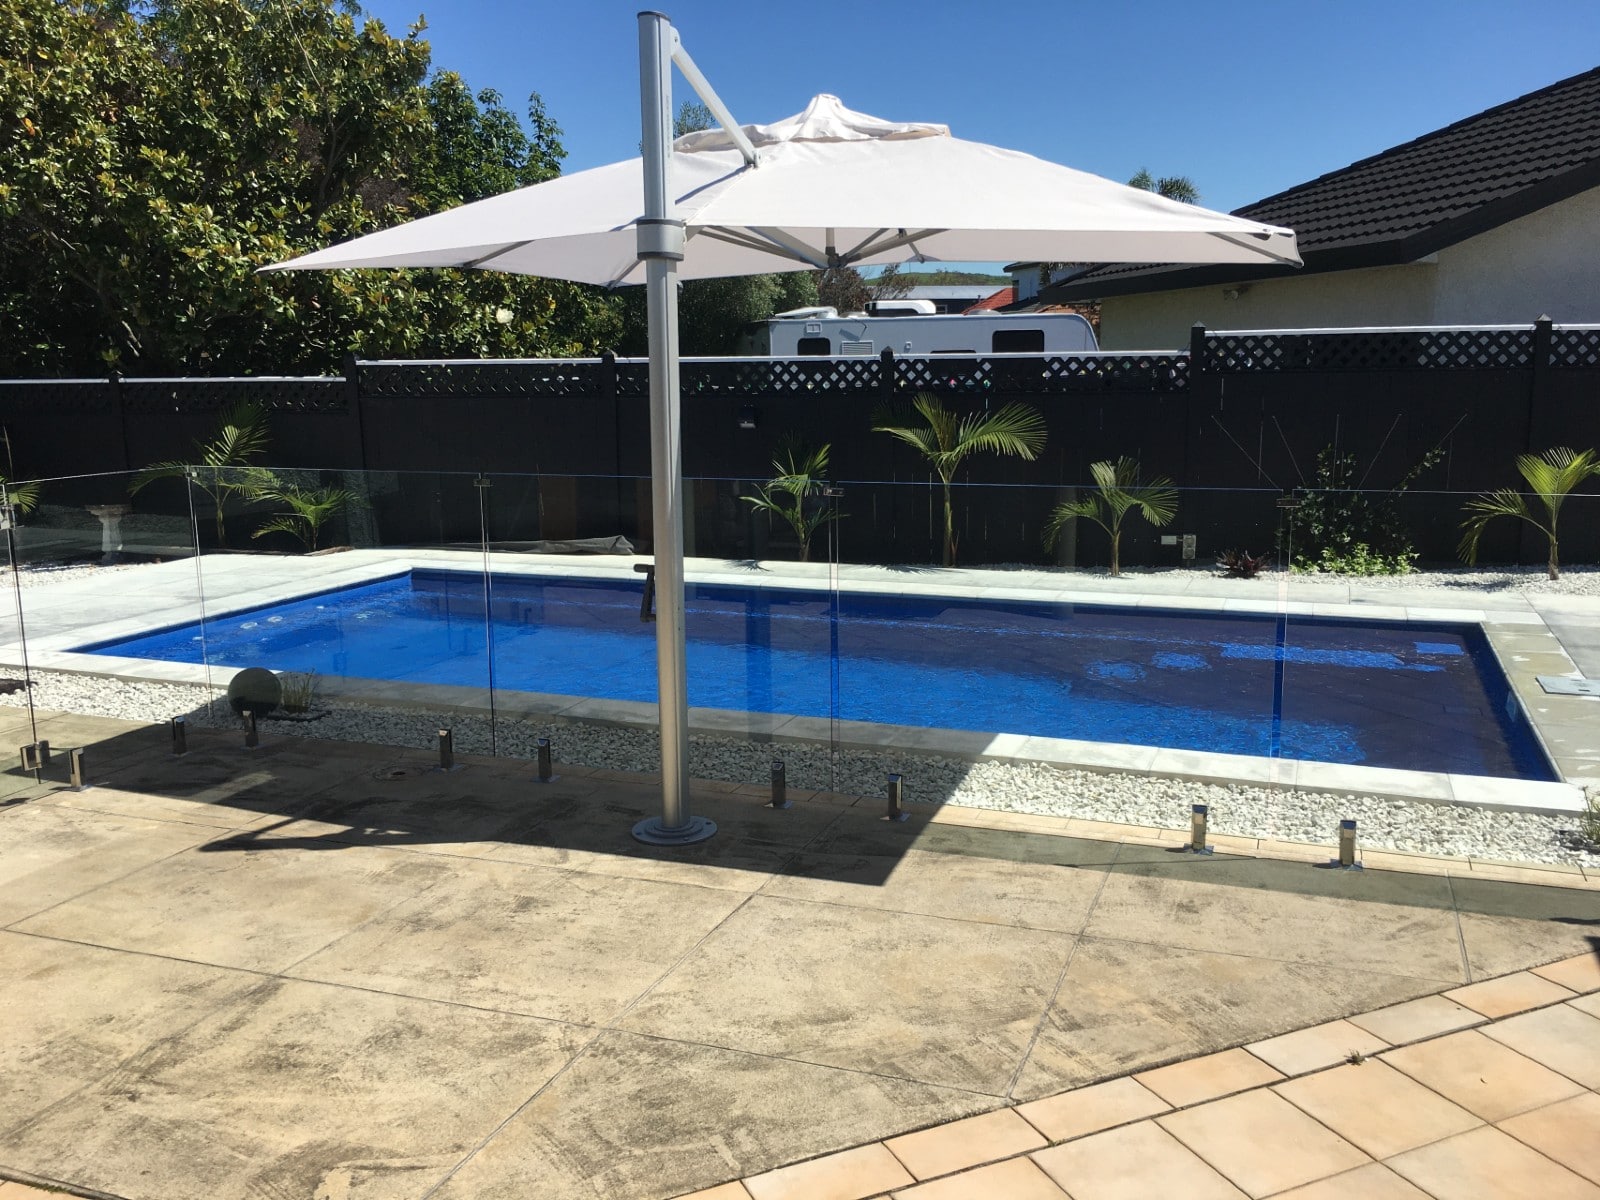 First Shade7 Outdoor Umbrella installed for poolside haven in Hawkes Bay